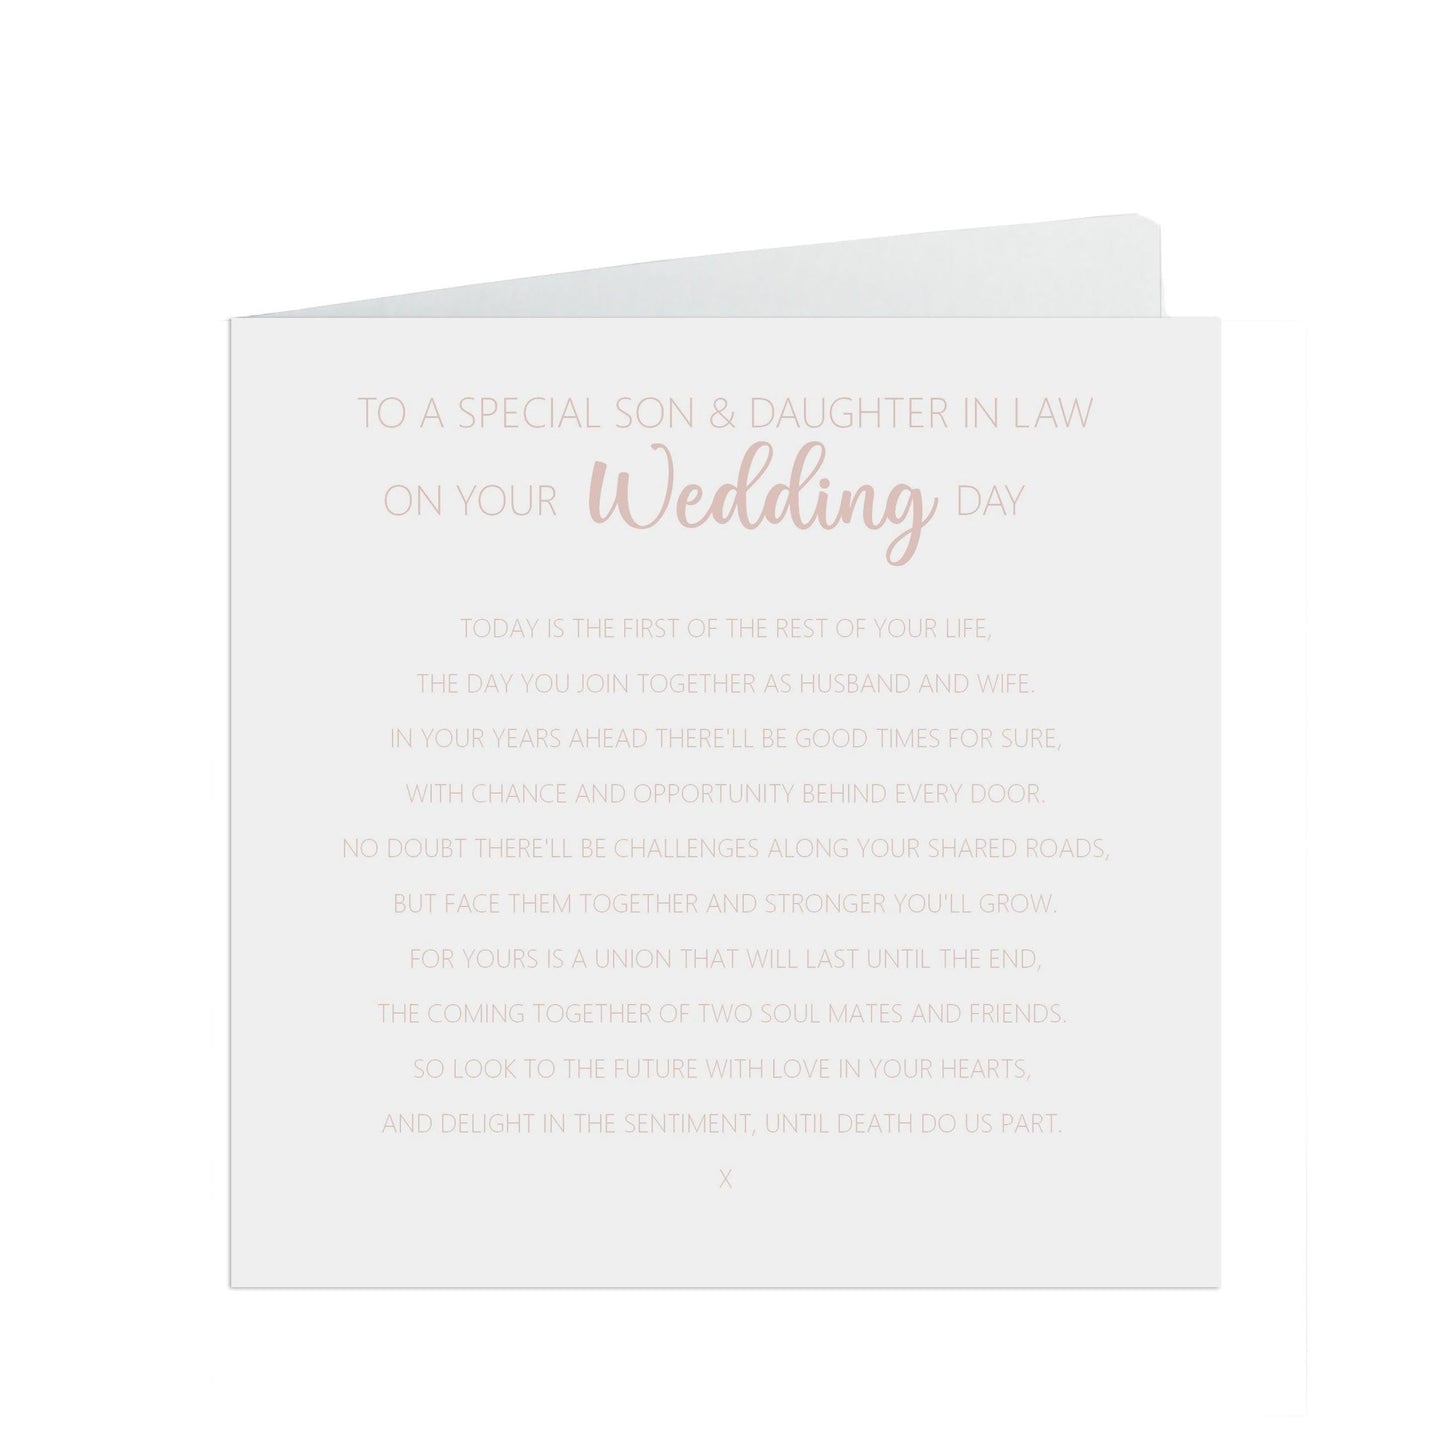  Son & Daughter In Law On Your Wedding Day Card, Rose Gold Effect 6x6 Inches In Size With A White Envelope by PMPRINTED 